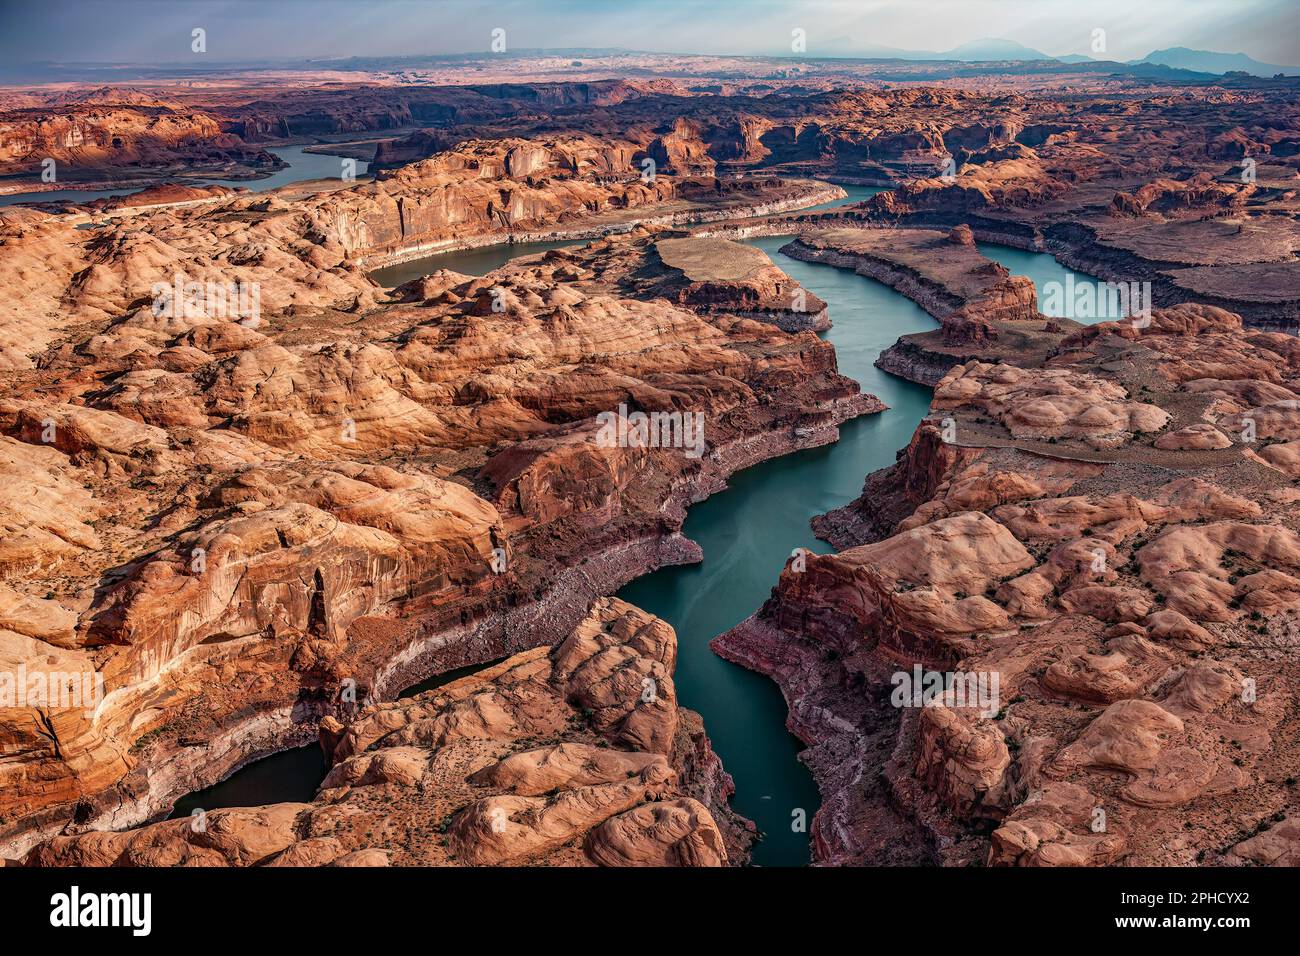 Meandering Waters of Glen Canyon - Lake Powell Stock Photo